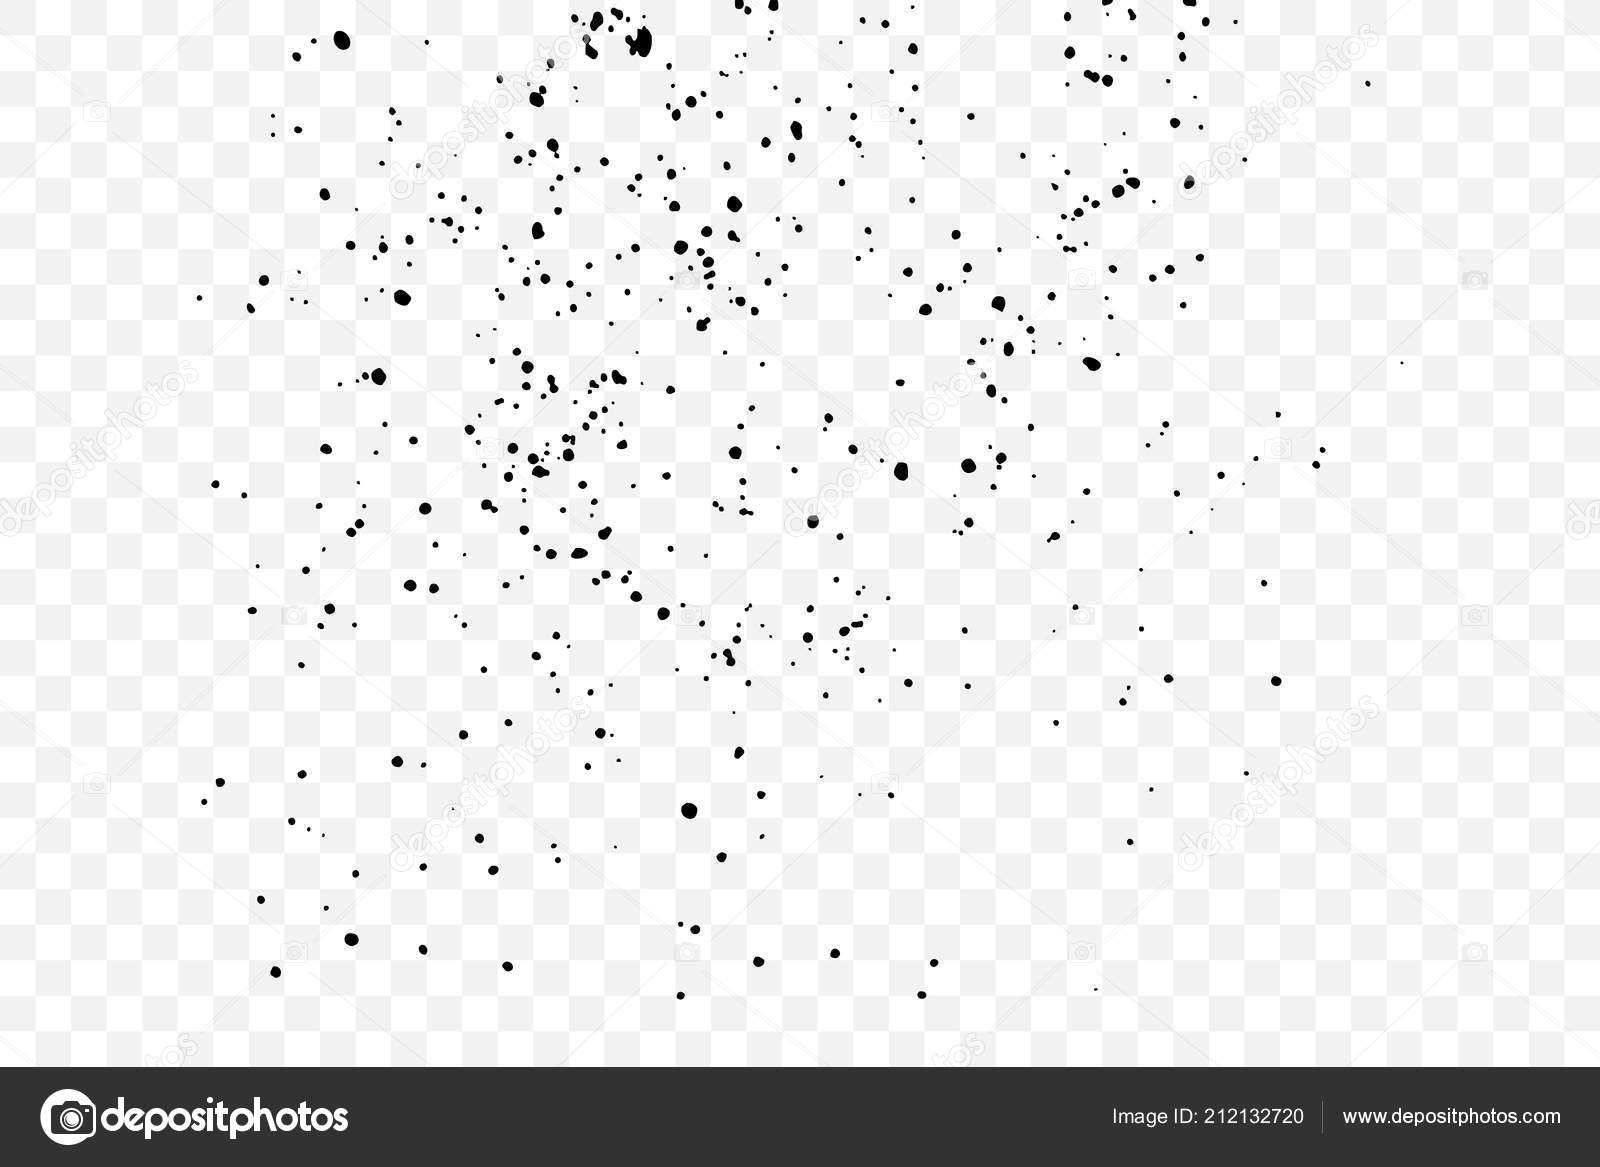 Grainy Grunge Abstract Texture Transparent Paint Spray Drop Black Ink Vector Image By C Goldenshrimp Vector Stock